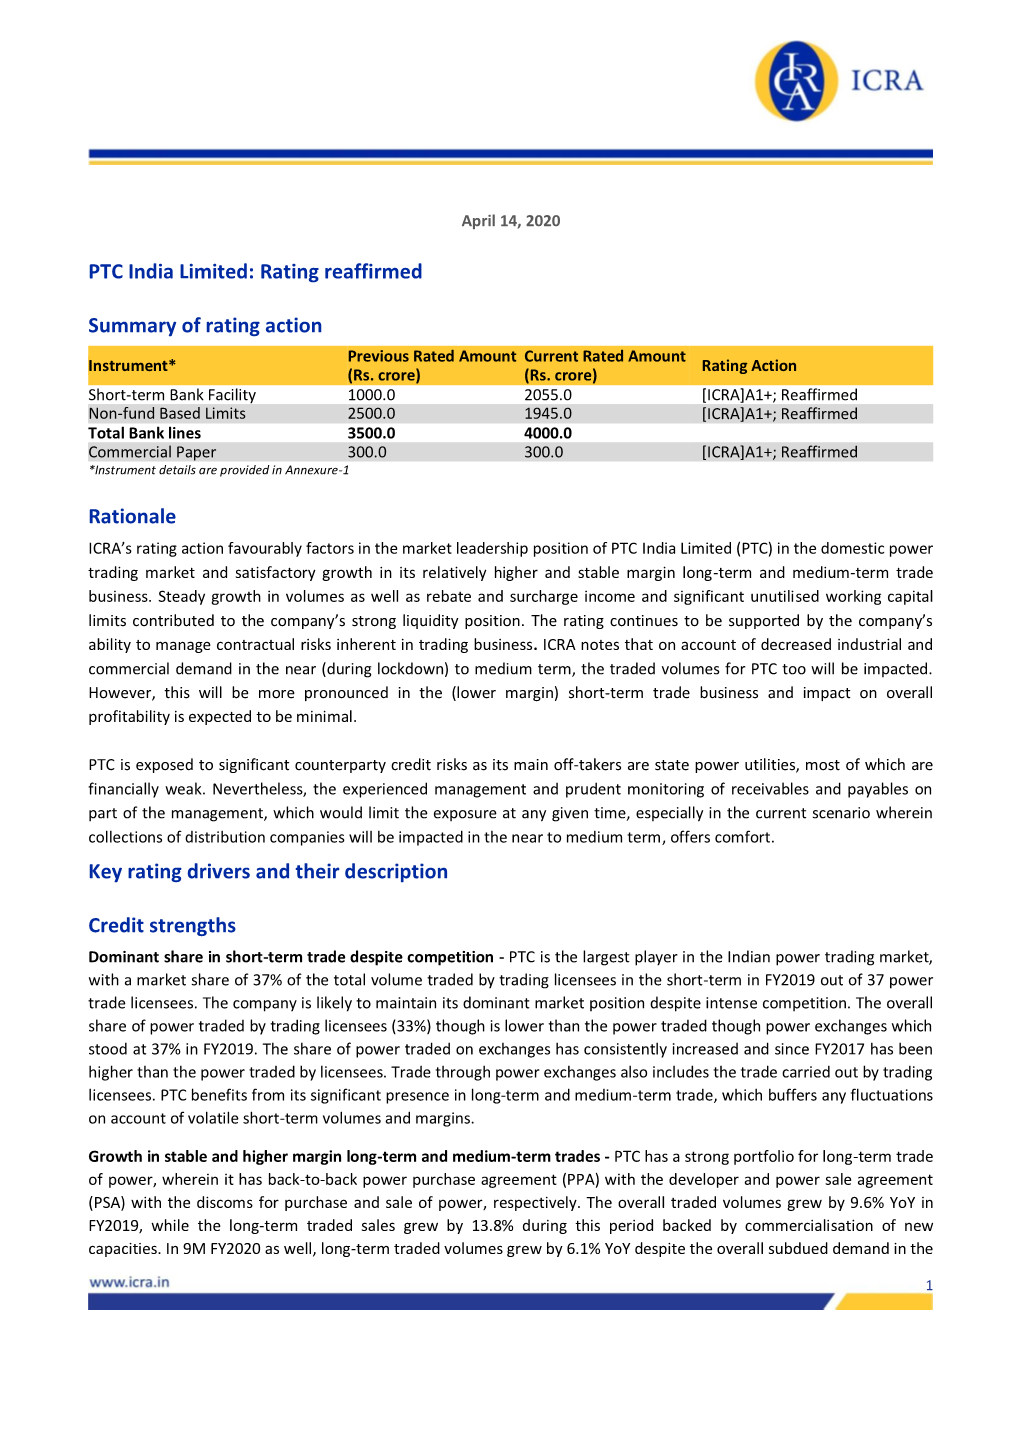 PTC India Limited: Rating Reaffirmed Summary of Rating Action Rationale